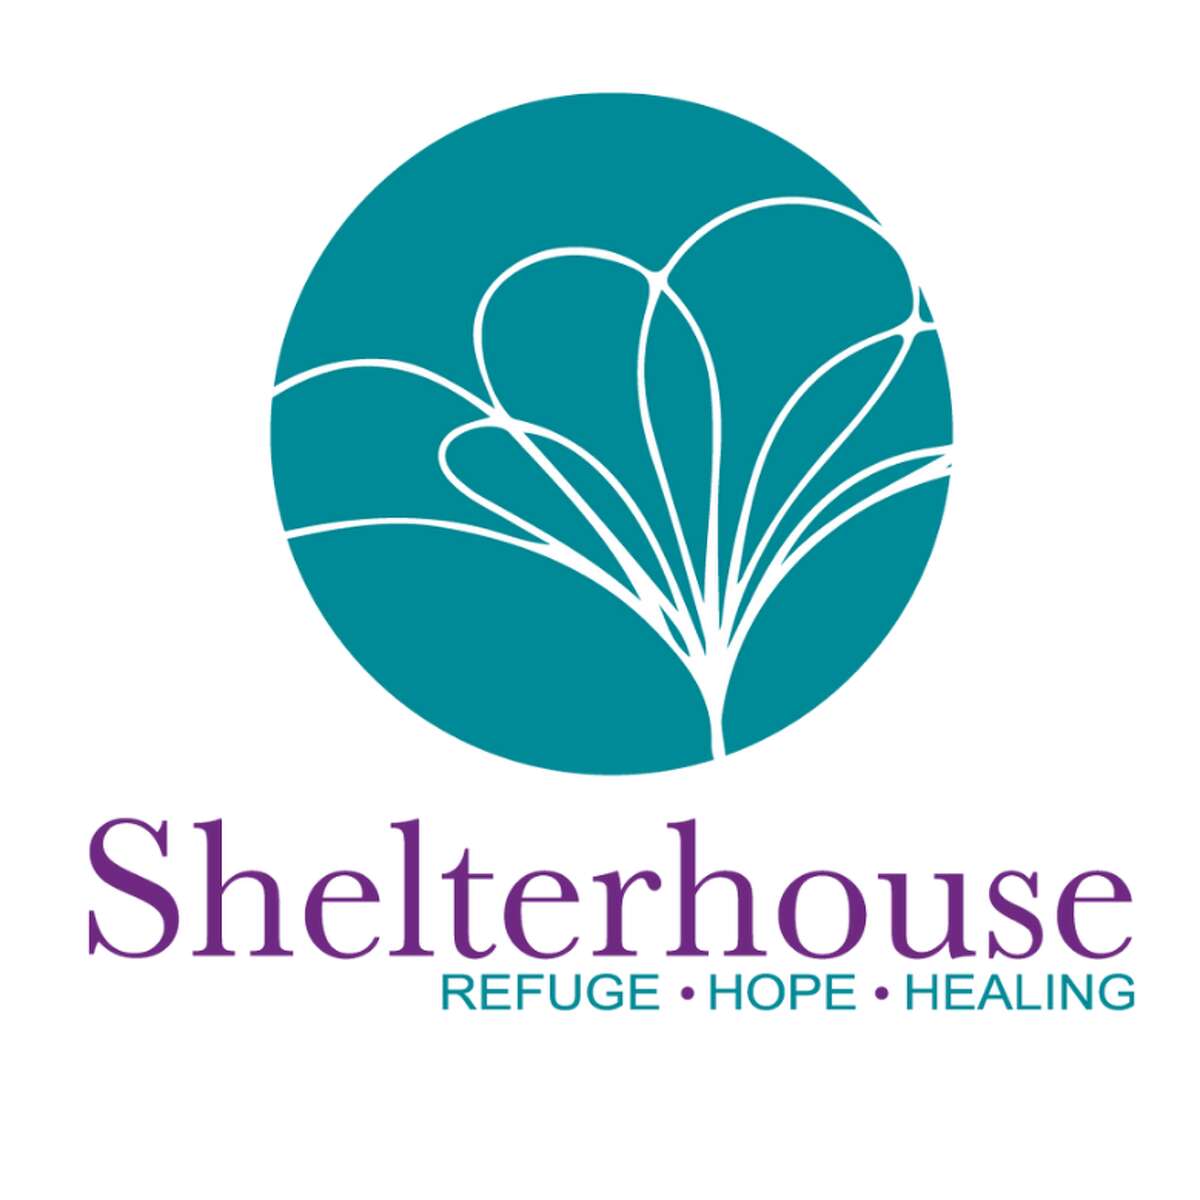 Shelterhouse is a nonprofit organization committed to providing safety, shelter, advocacy and counseling to survivors of domestic violence and sexual assault in Midland and Gladwin counties.